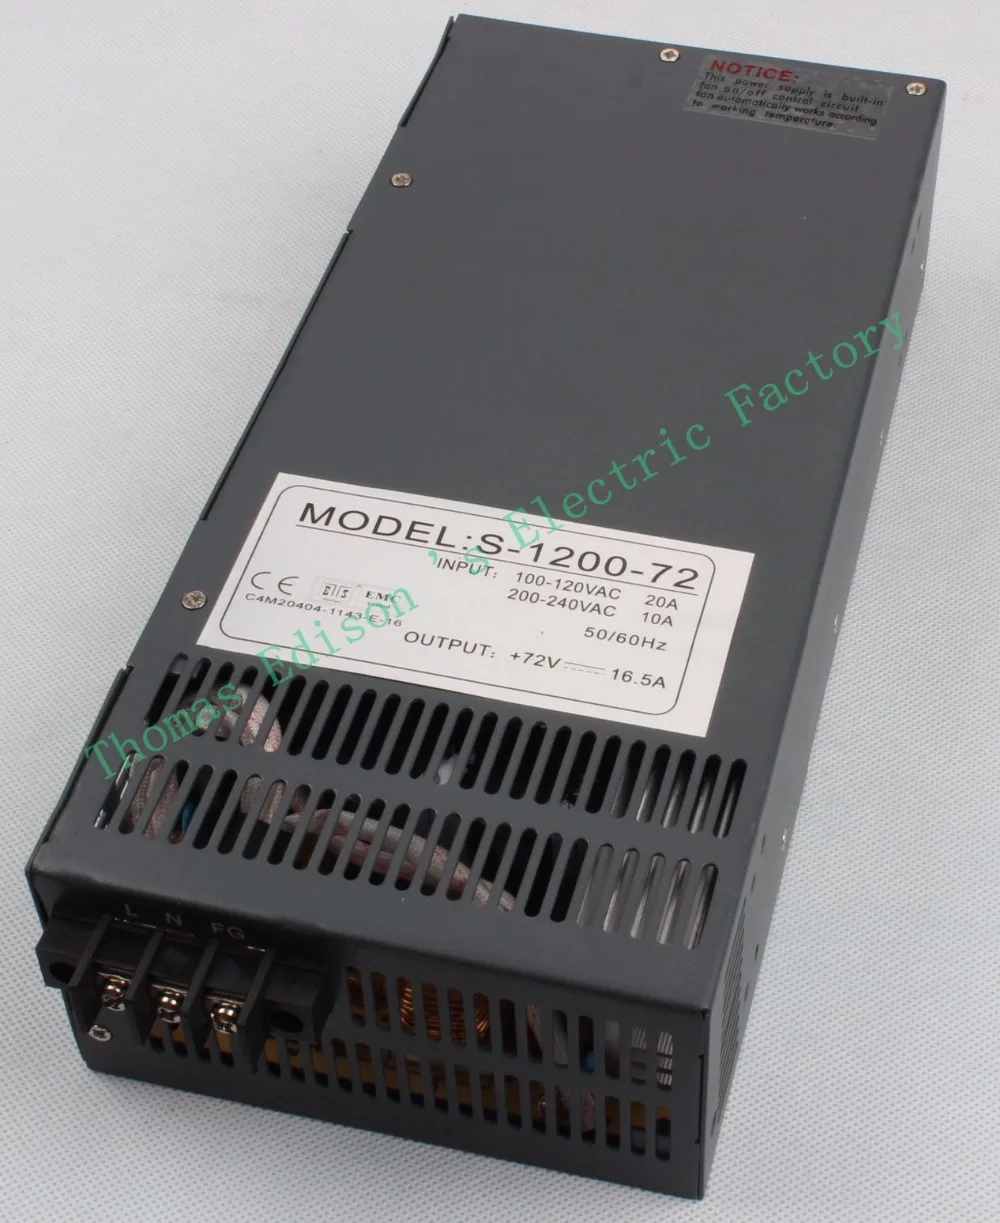 Switching power supply 1200W 72V 16.5A POWER SUPPLY for LED Strip light AC to DC power suply input 110v 220v S-1200-72